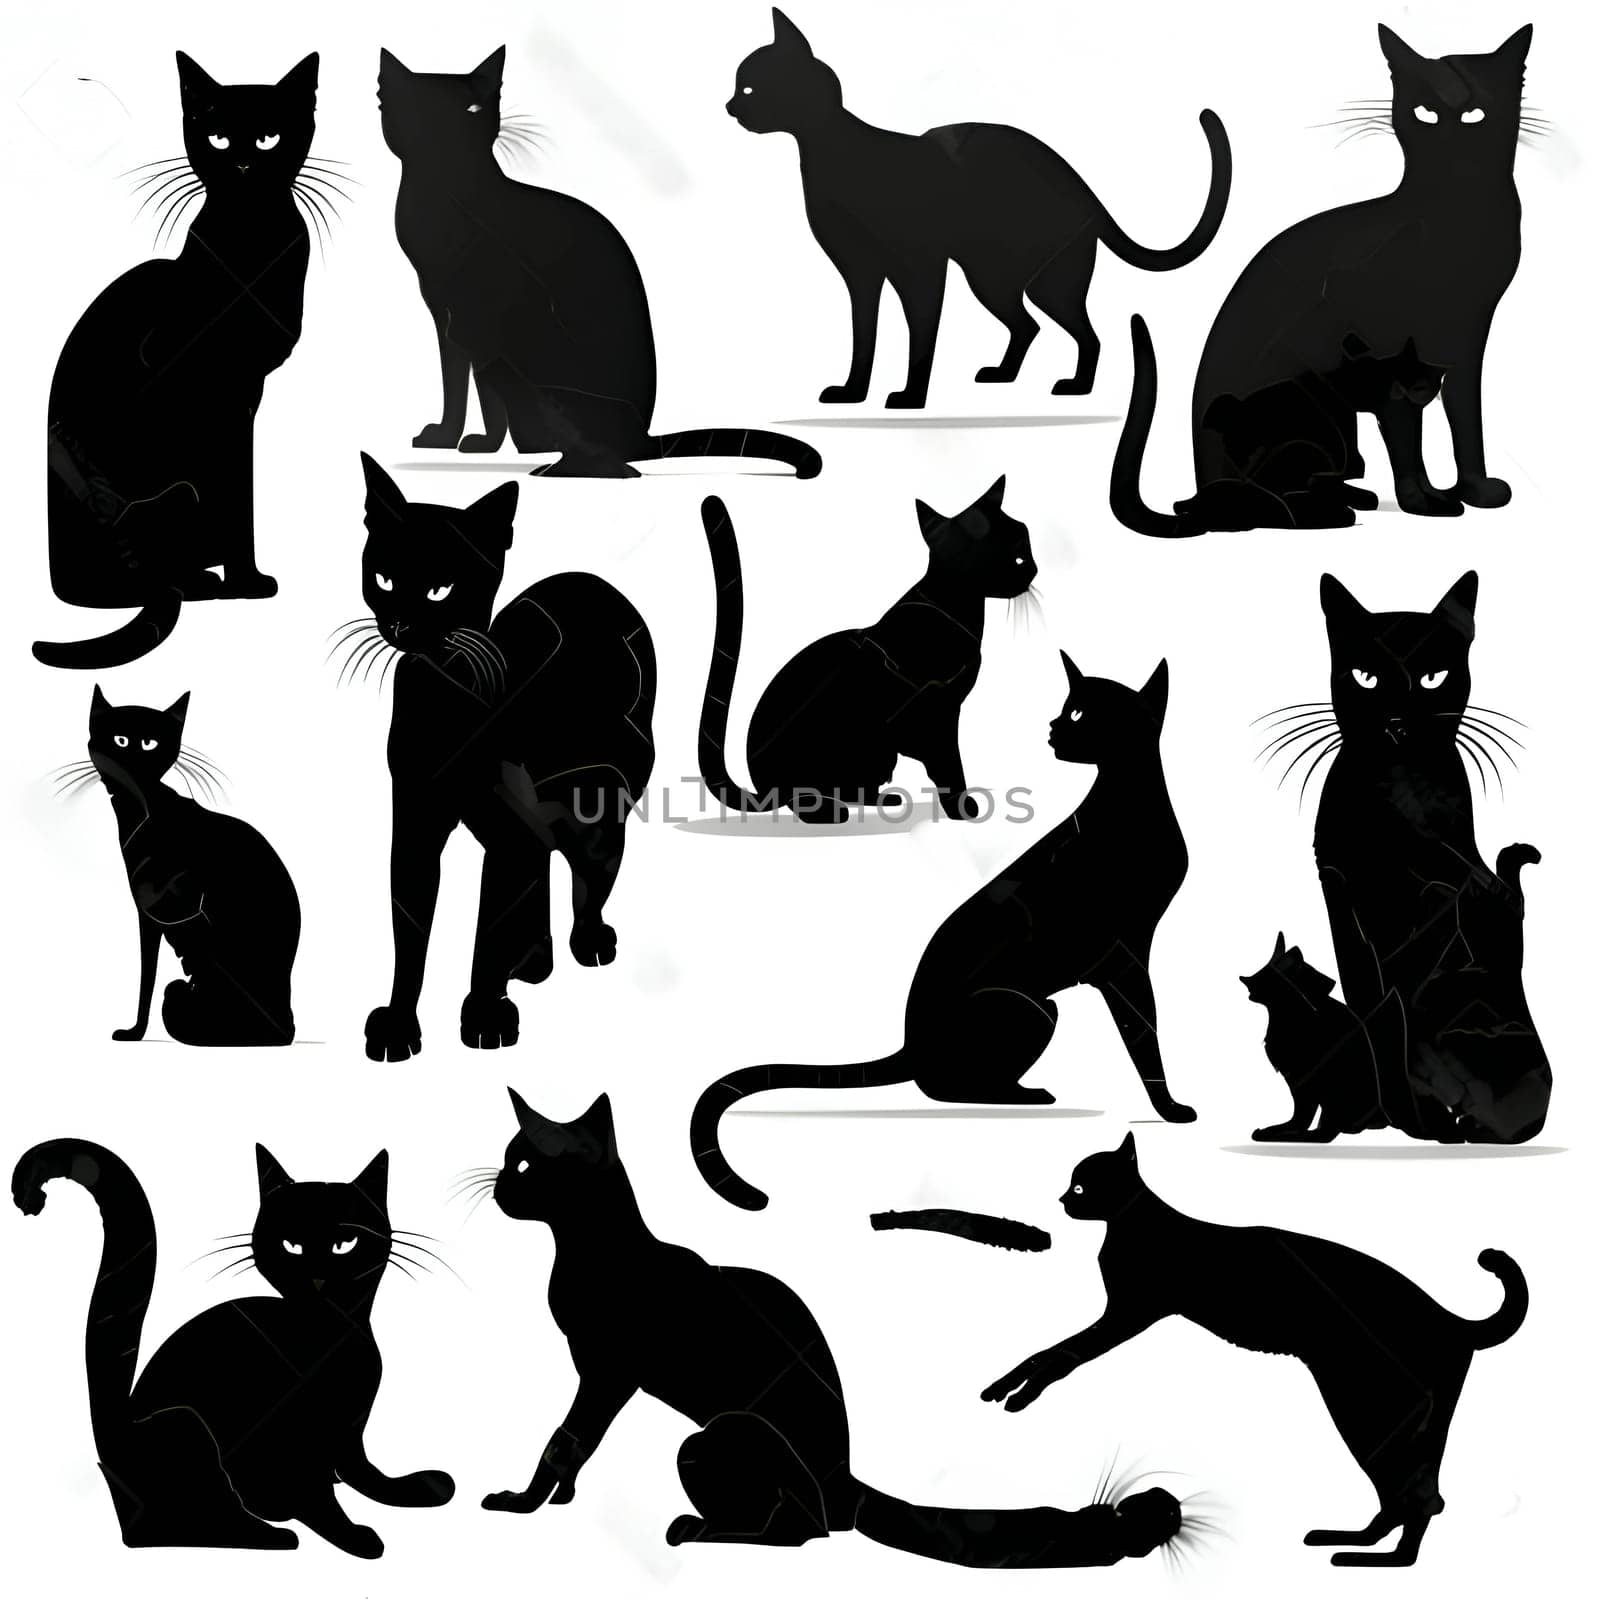 Vector illustration of a cats set in black silhouette against a clean white background, capturing graceful forms.